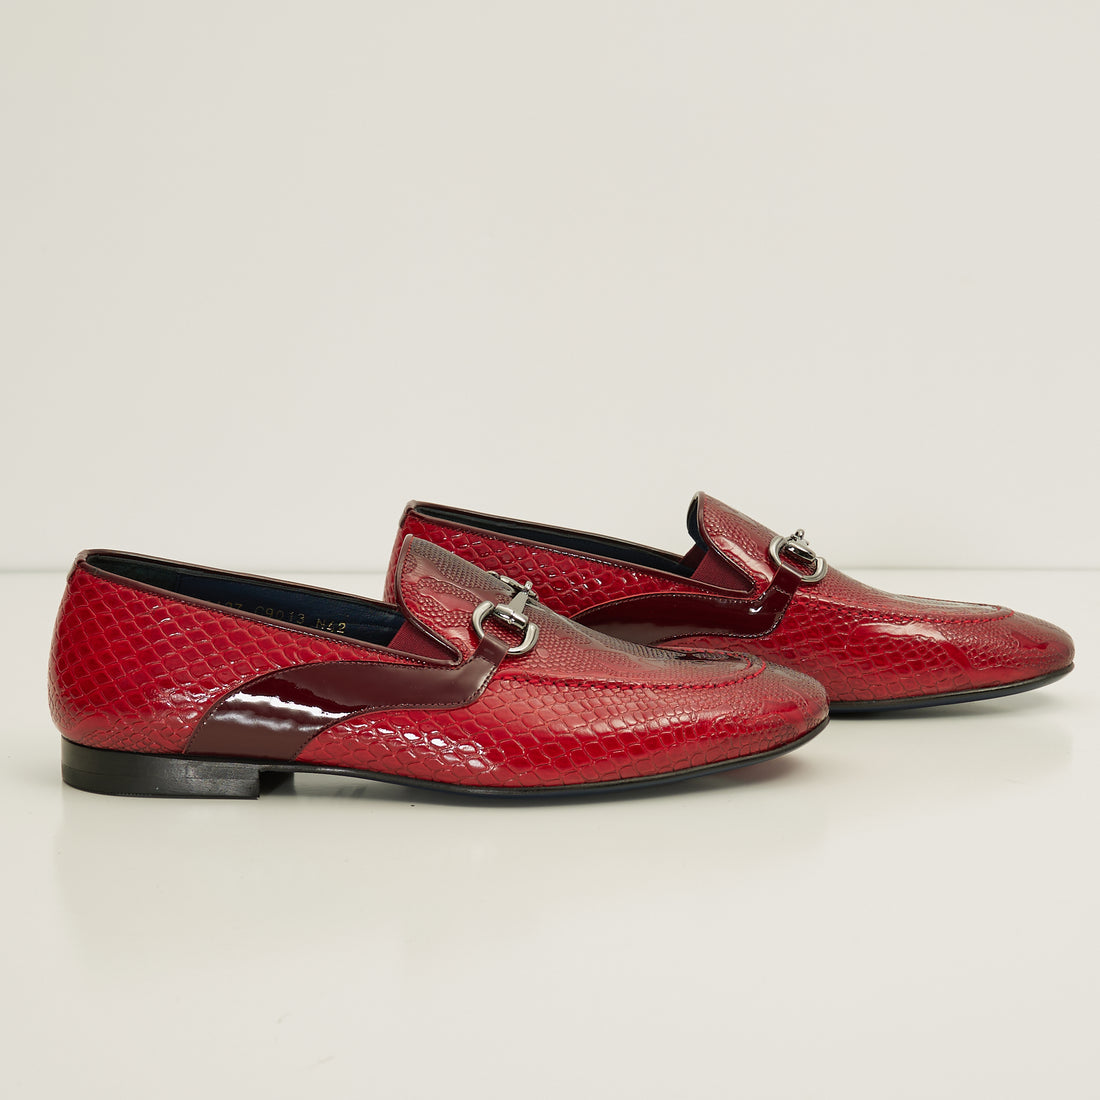 N° C9013X SNAKE EMBOSSED LEATHER AND SILVER METAL BIT LOAFER - VALENTINE RED